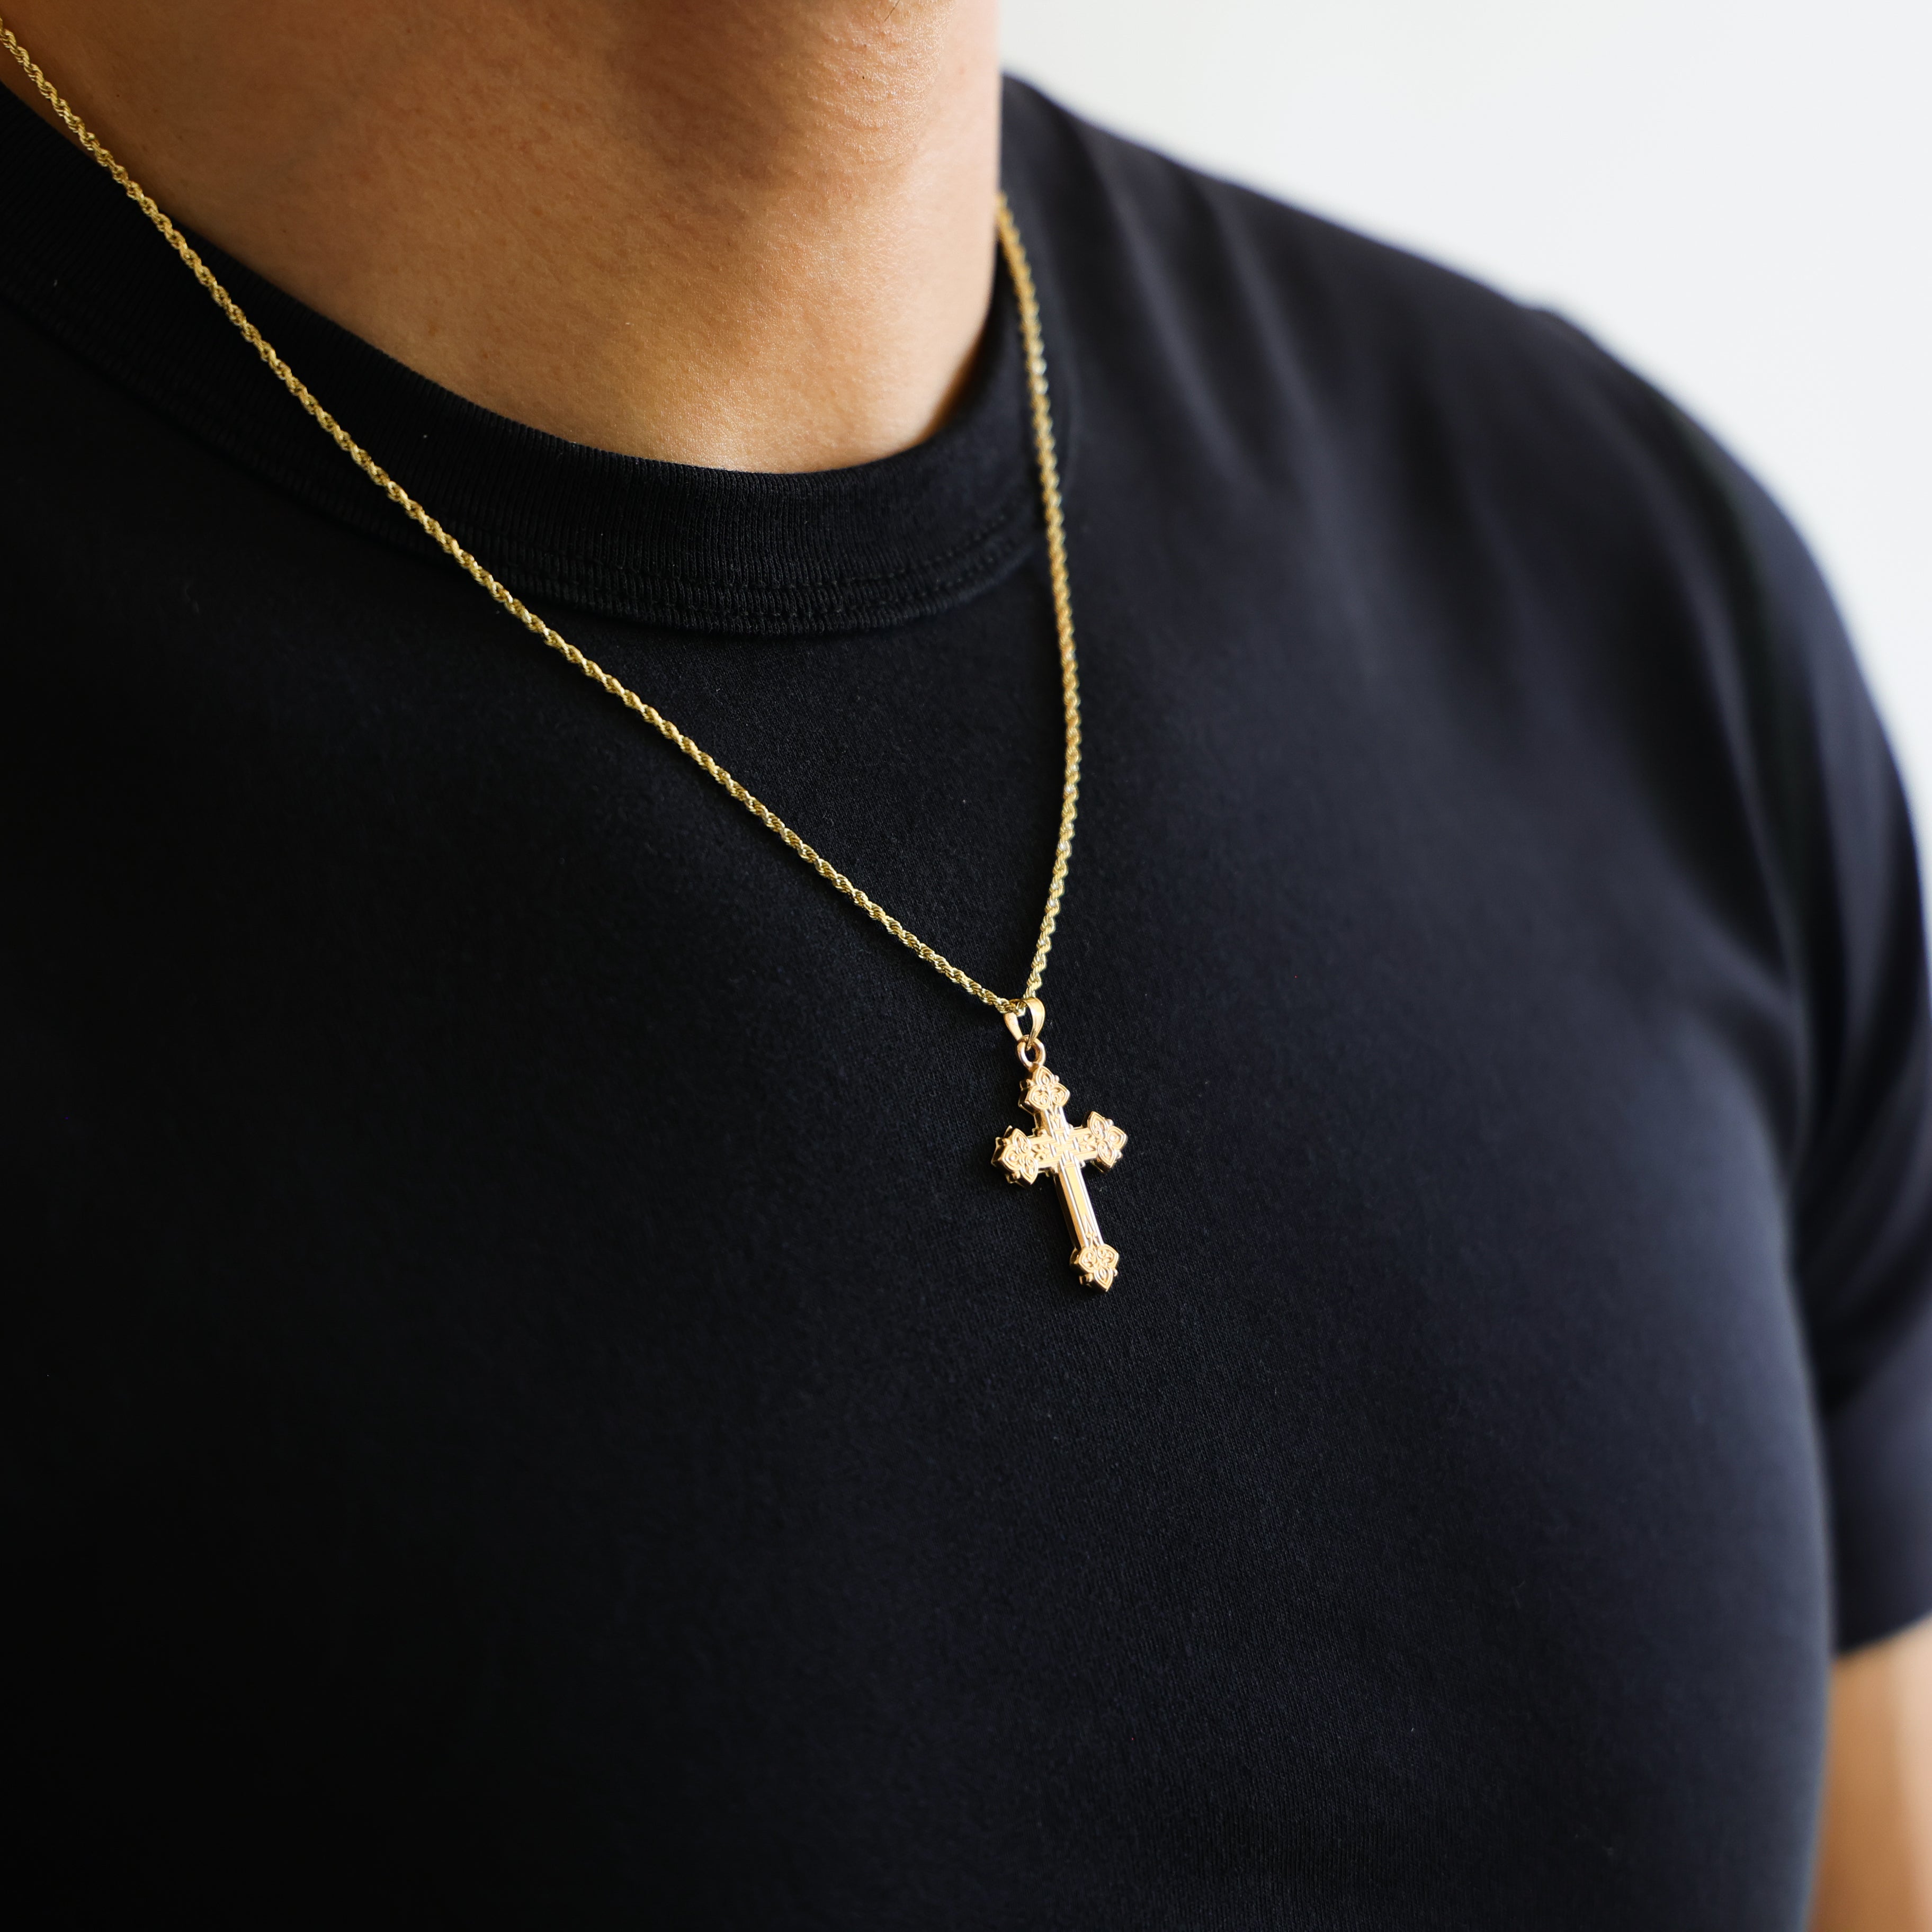 Gold Intricate Cross Religious Pendant Model-883 - Charlie & Co. Jewelry